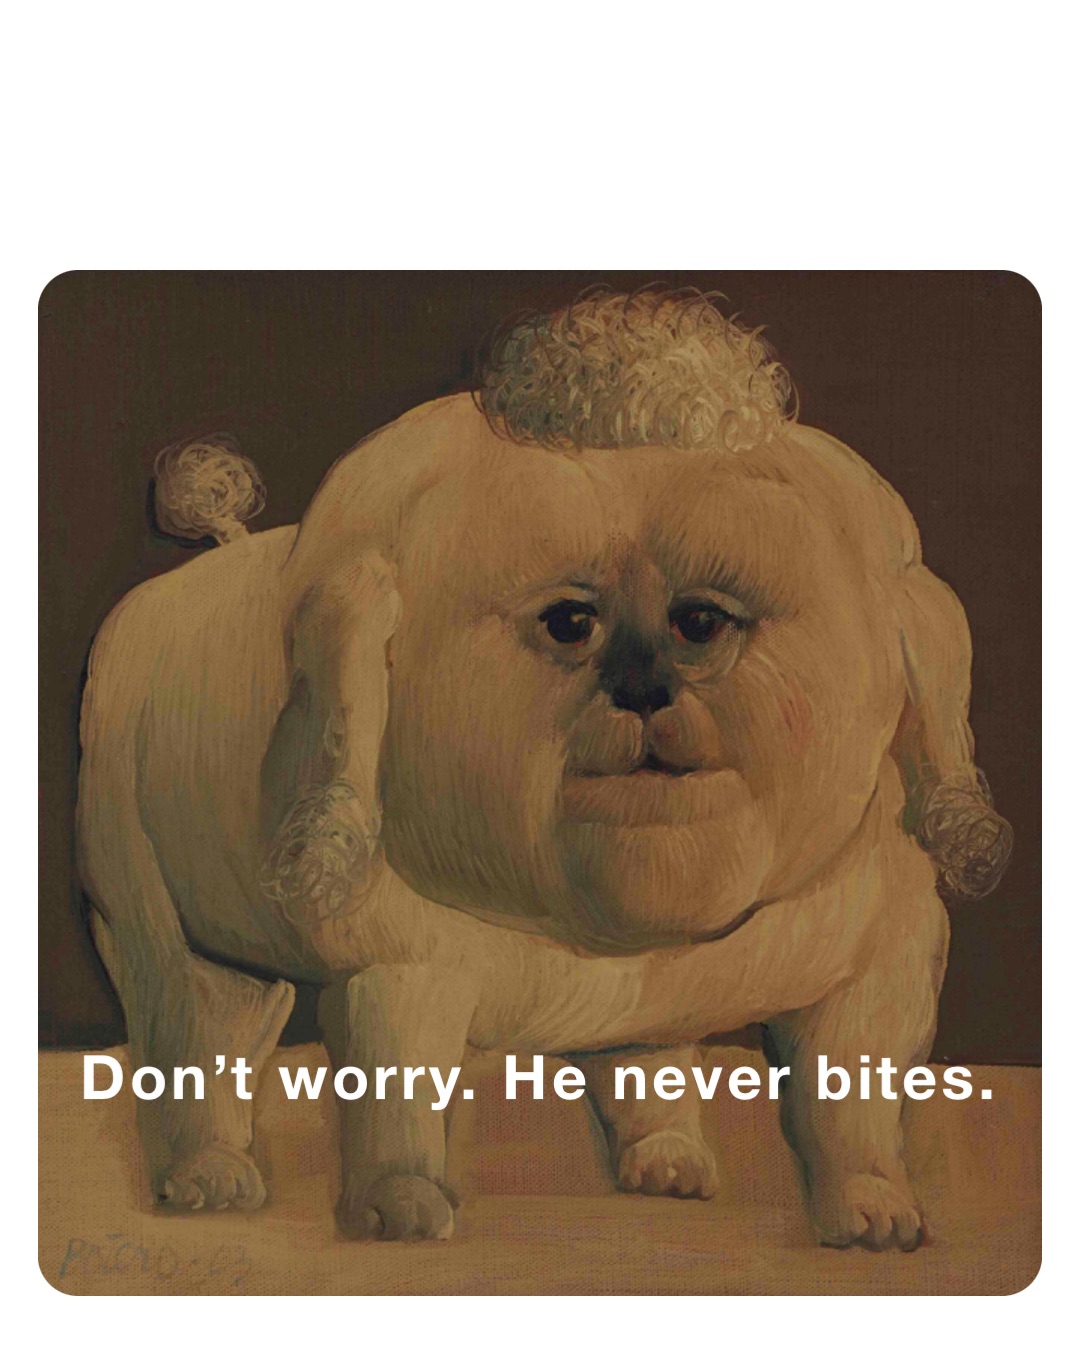 Don’t worry. He never bites.